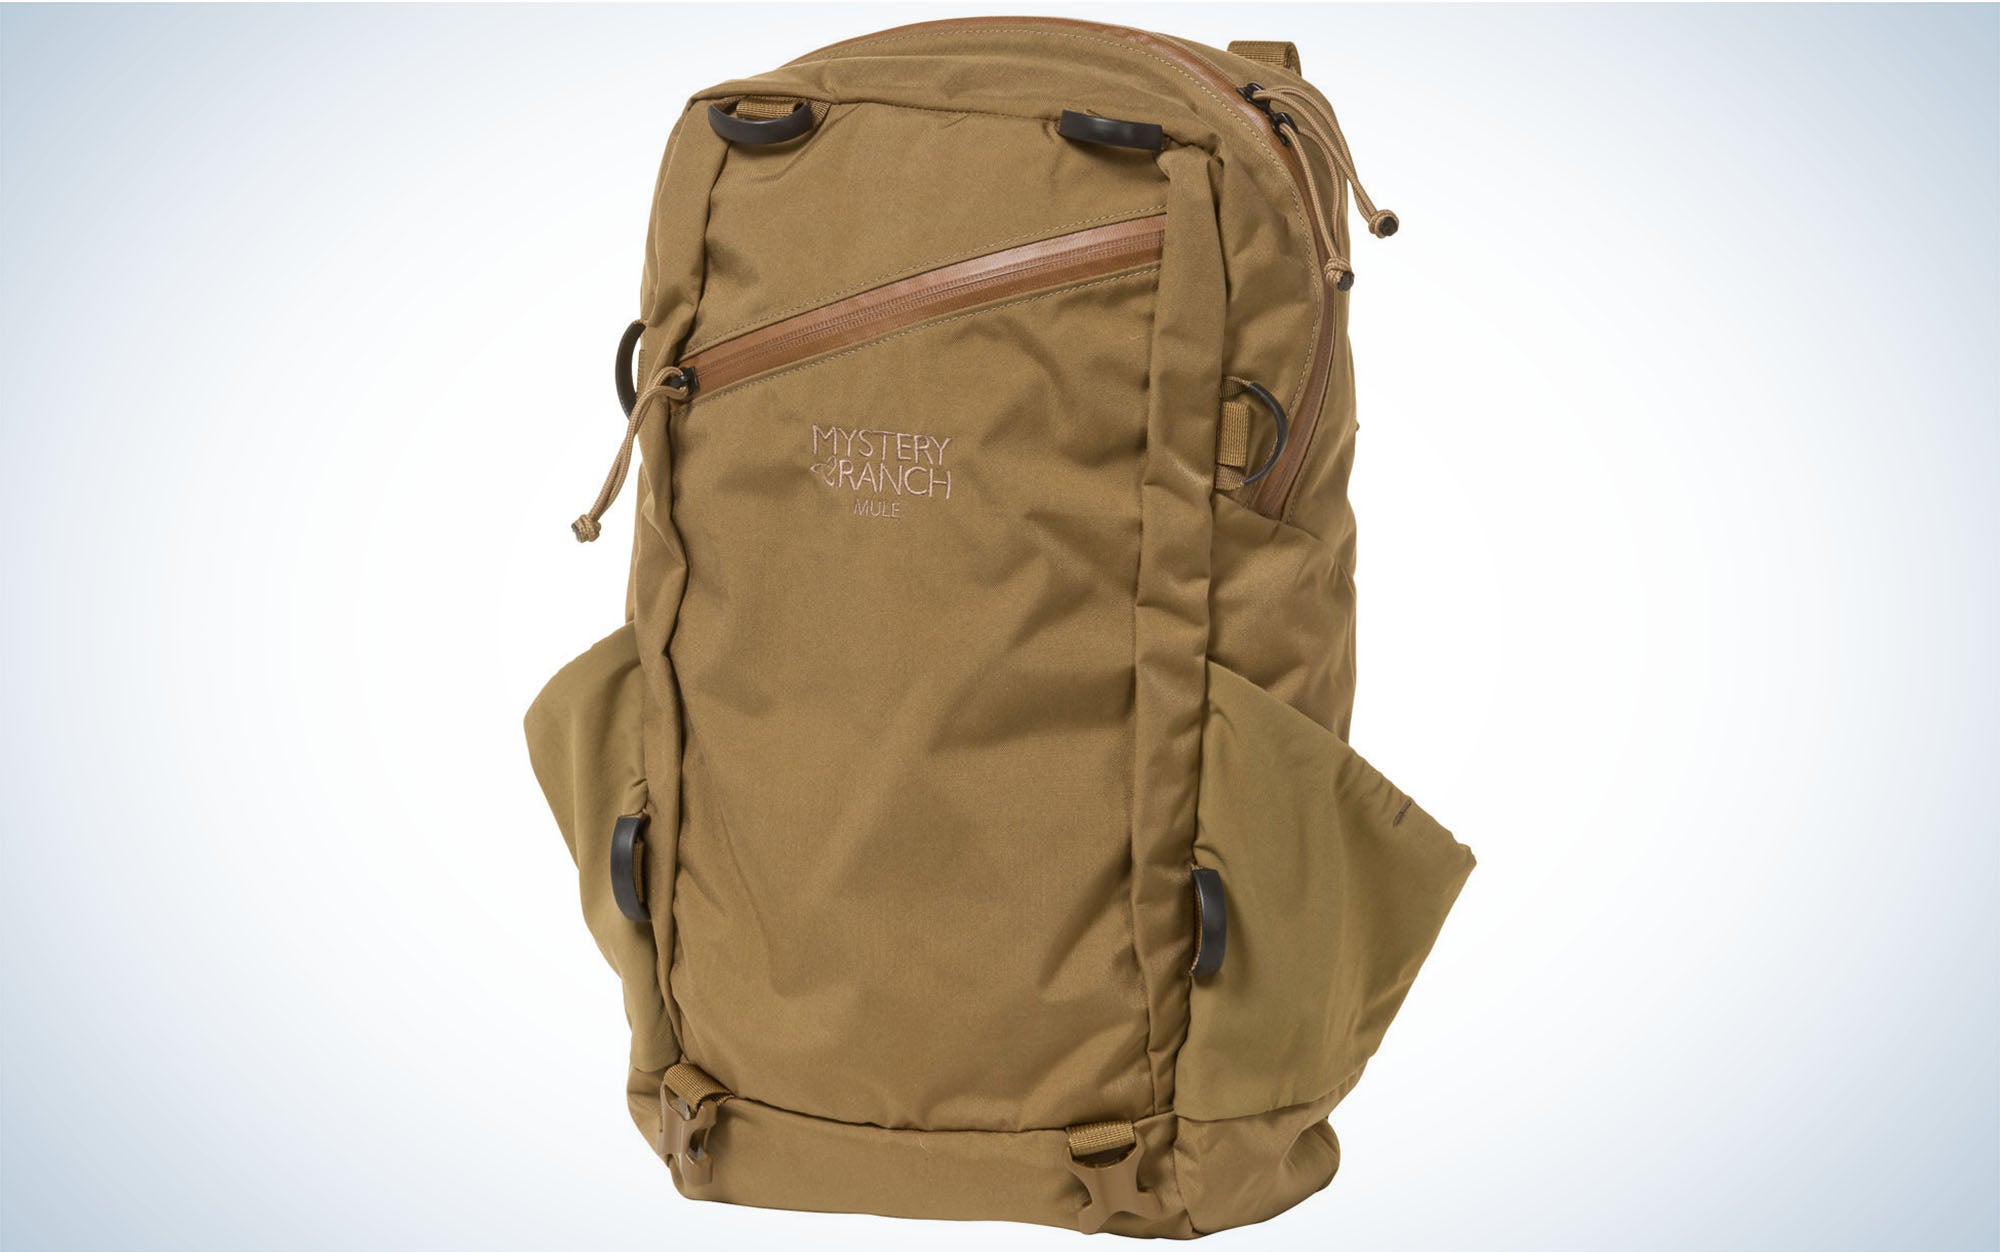 The Mystery Ranch Mule is the best value hunting backpack.